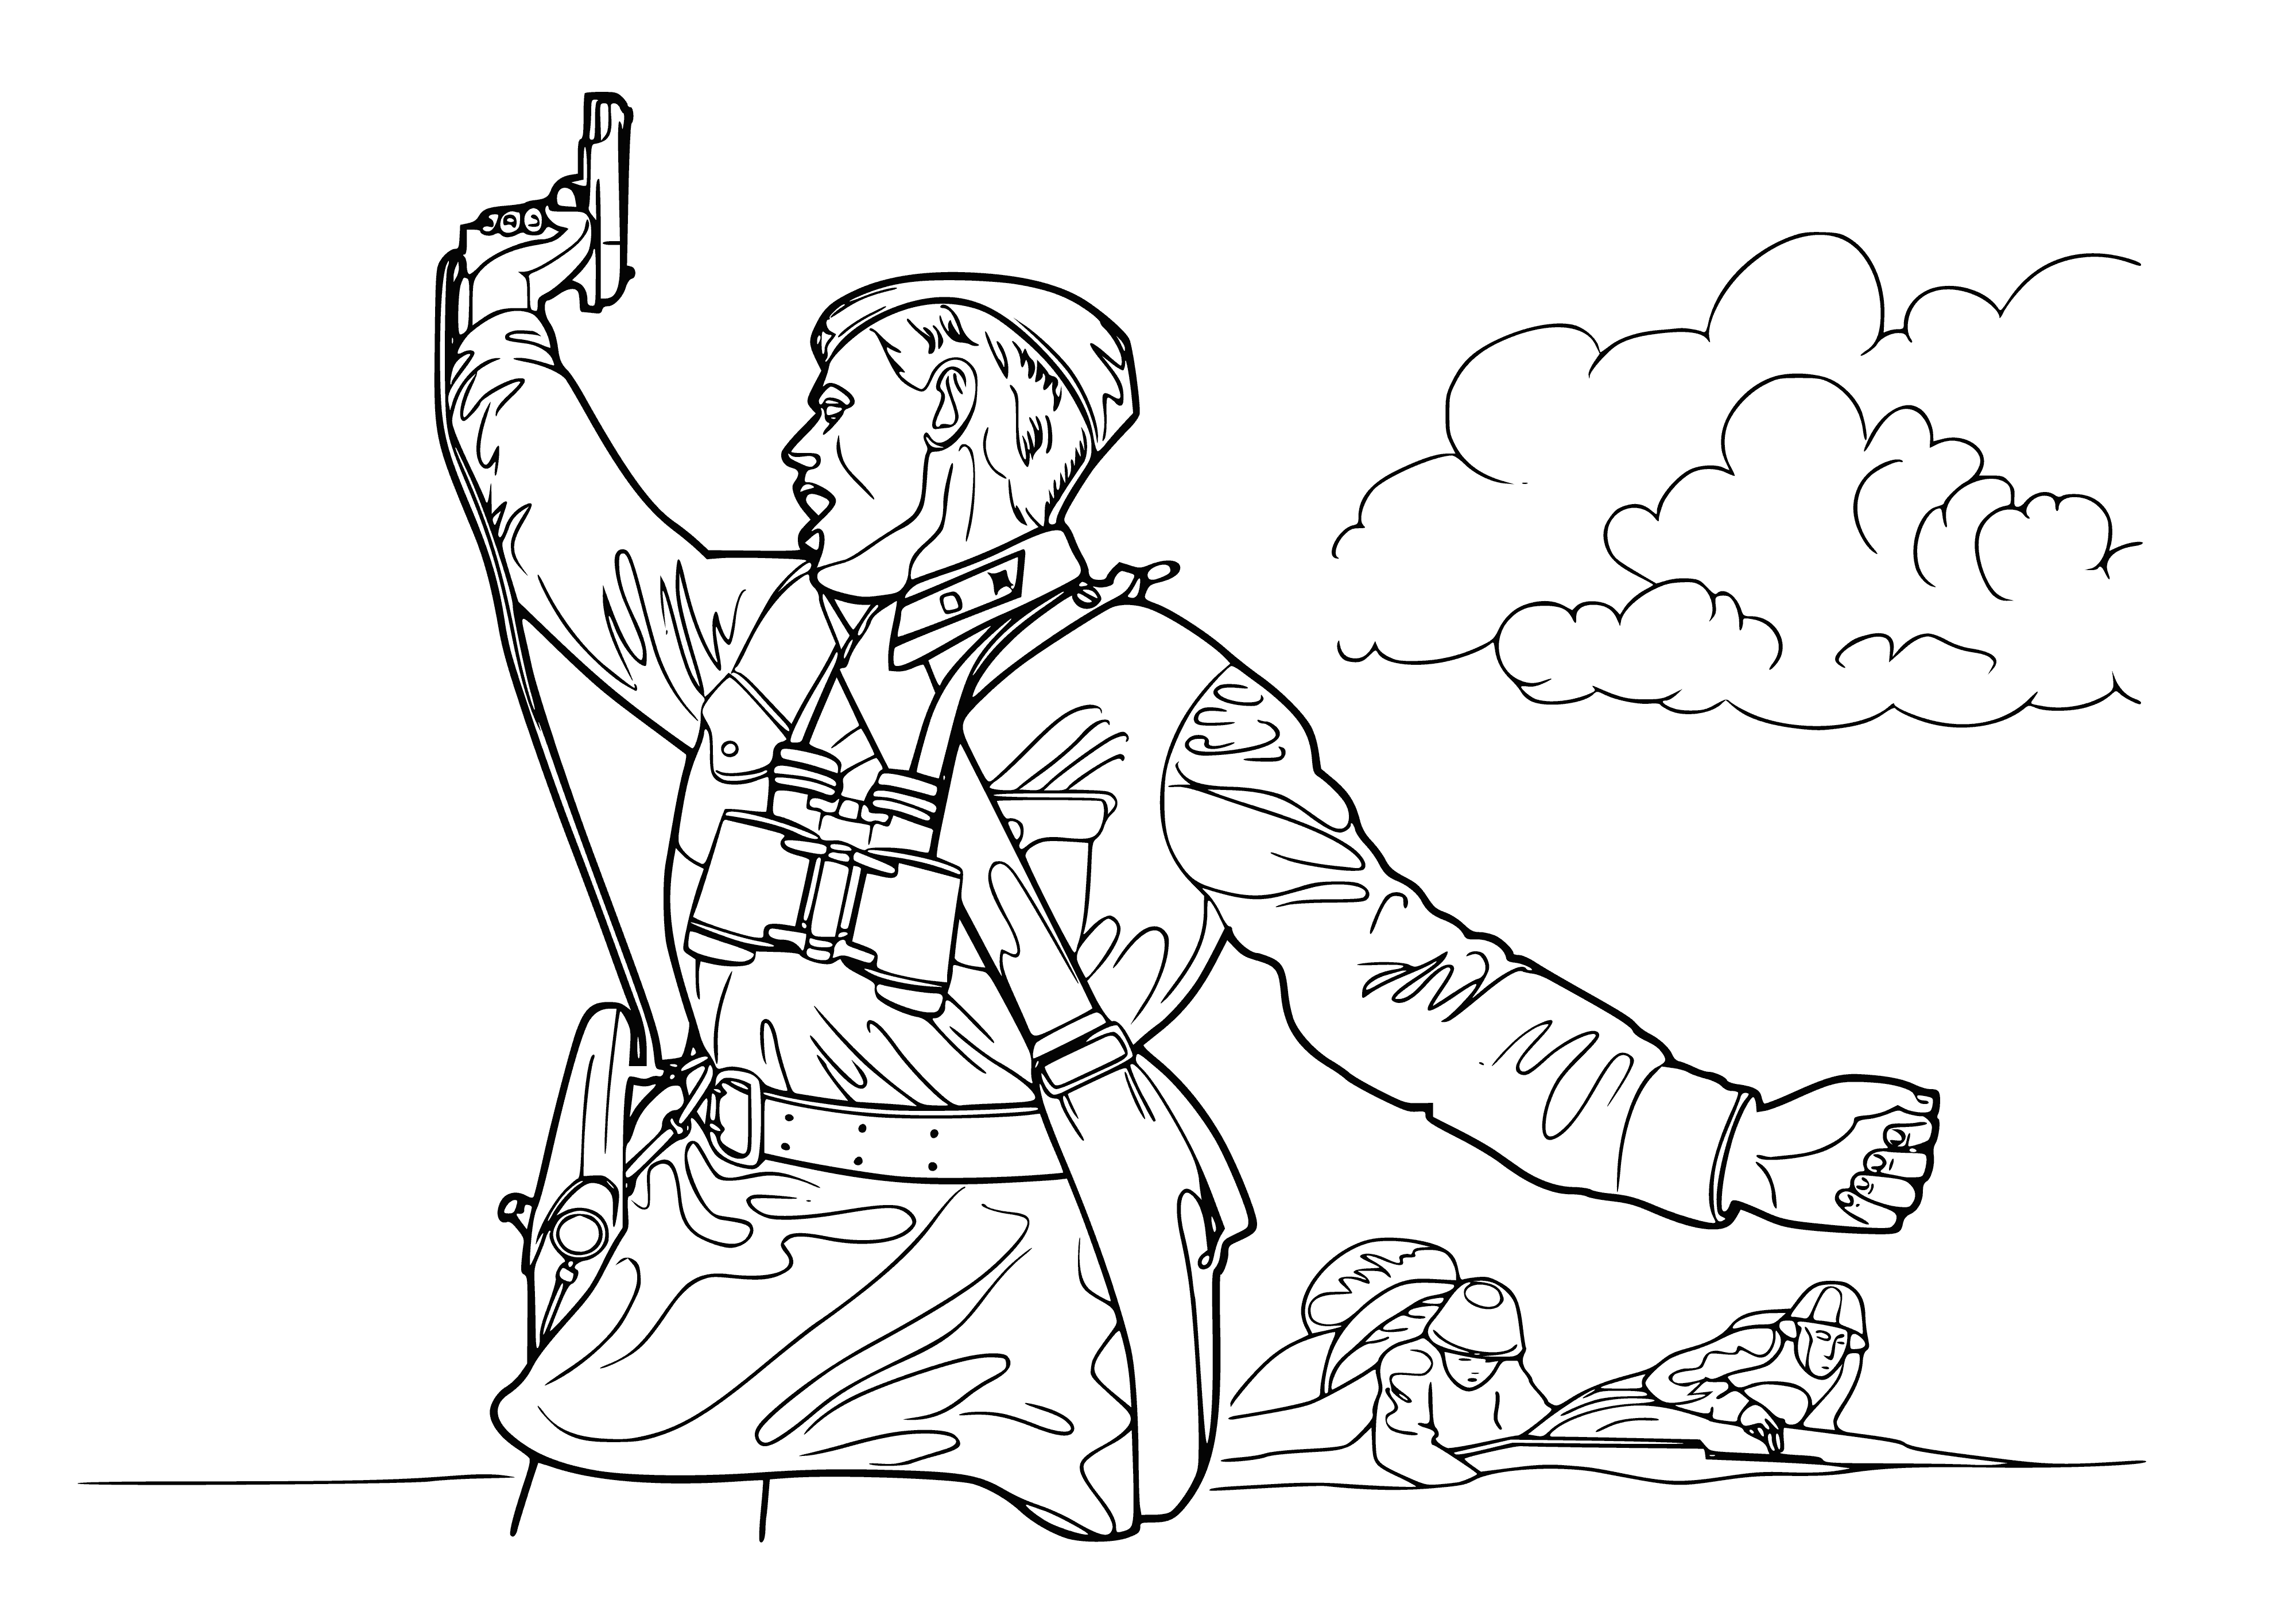 In the attack coloring page